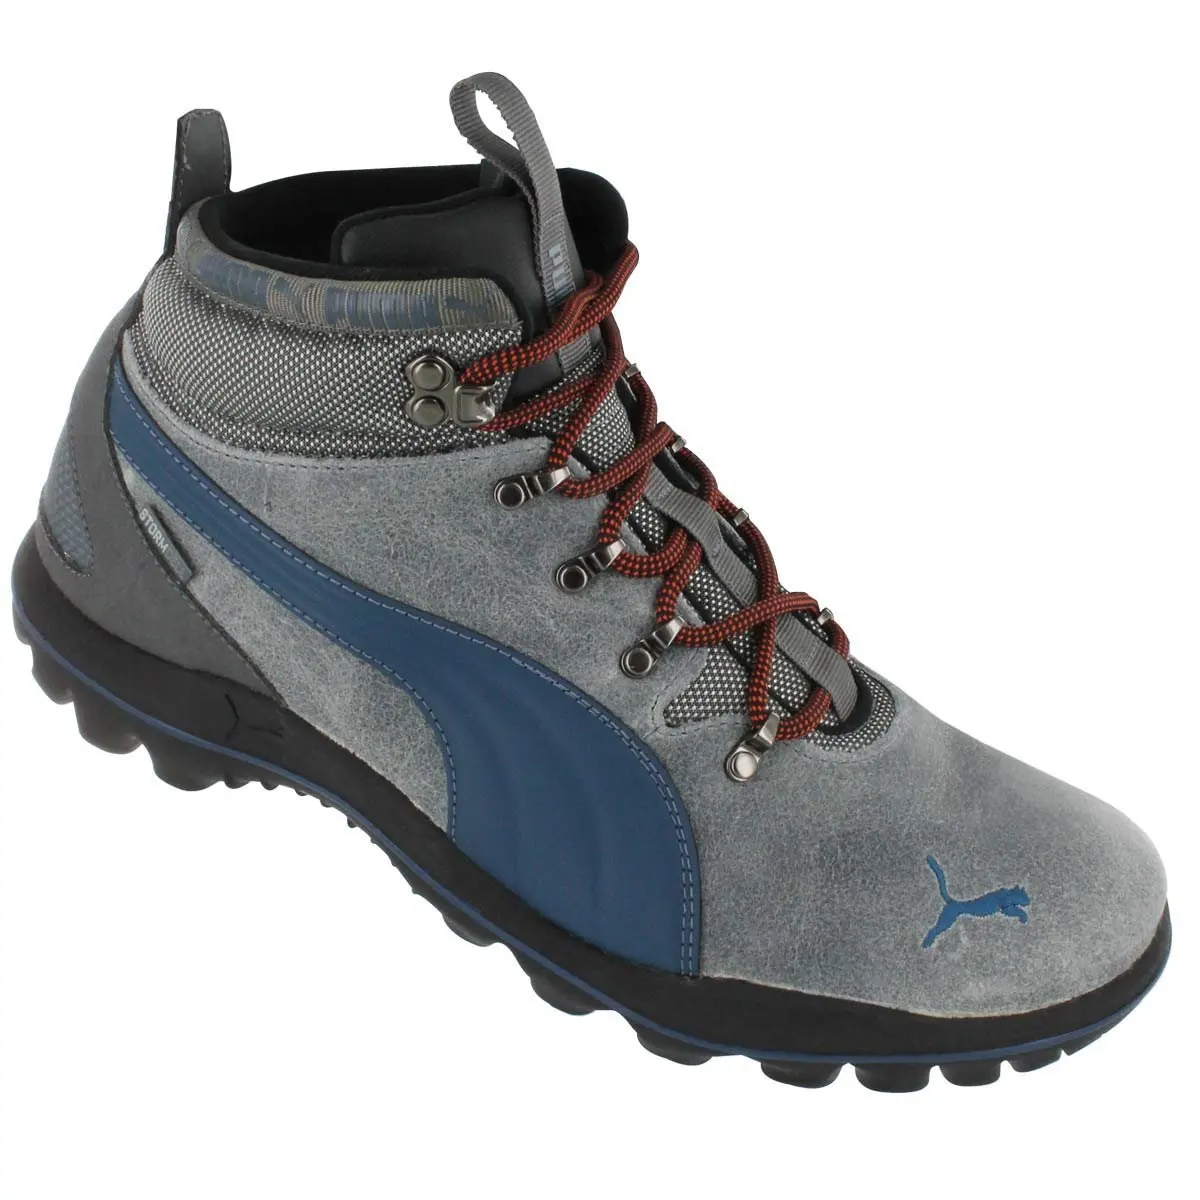 Buy Puma Silicis Leather Storm Cell Trekking Hiking Boots in Cheap Price on  Alibaba.com